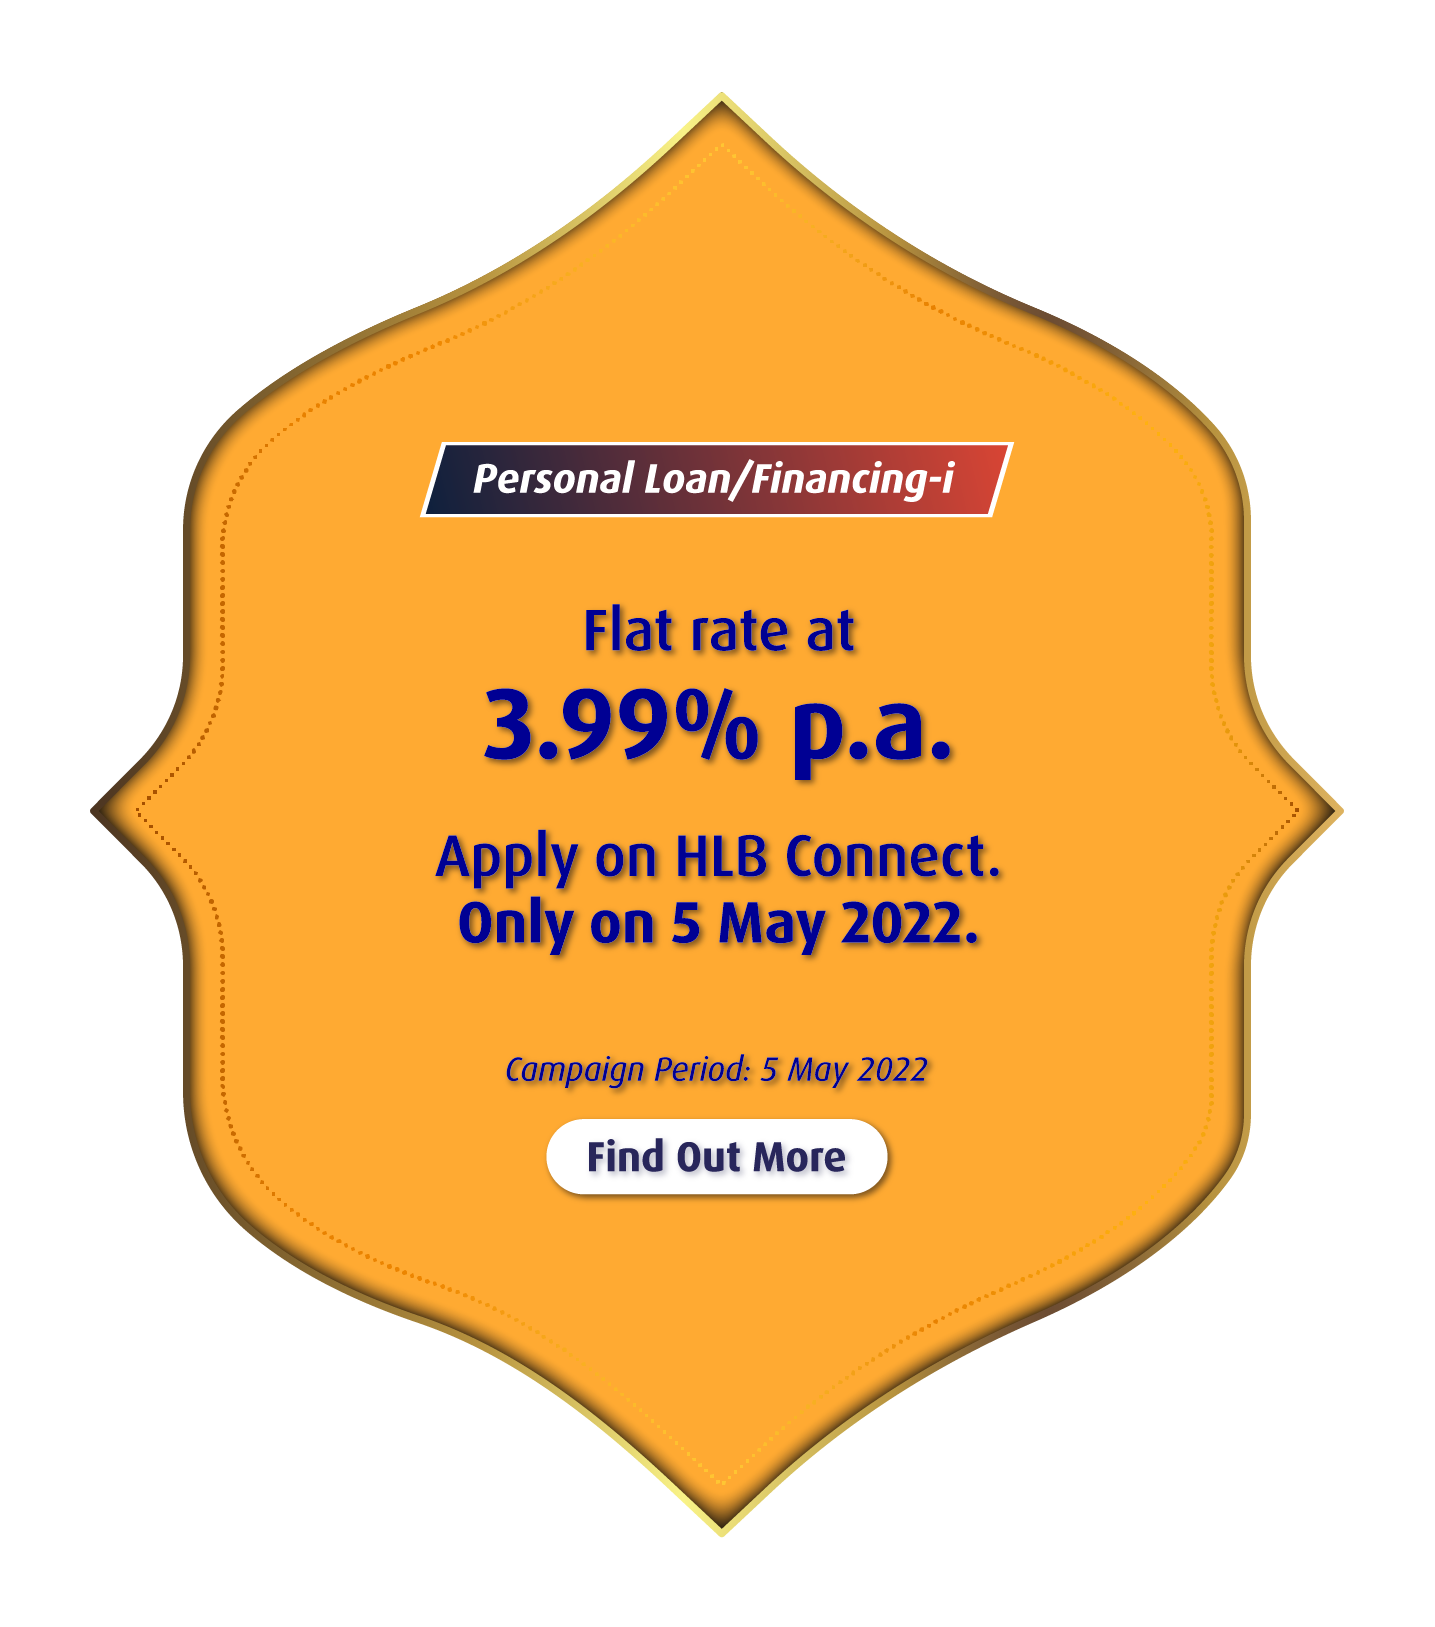 Flat rate at 3.99% p.a. (1-day only on 5.5.2022)